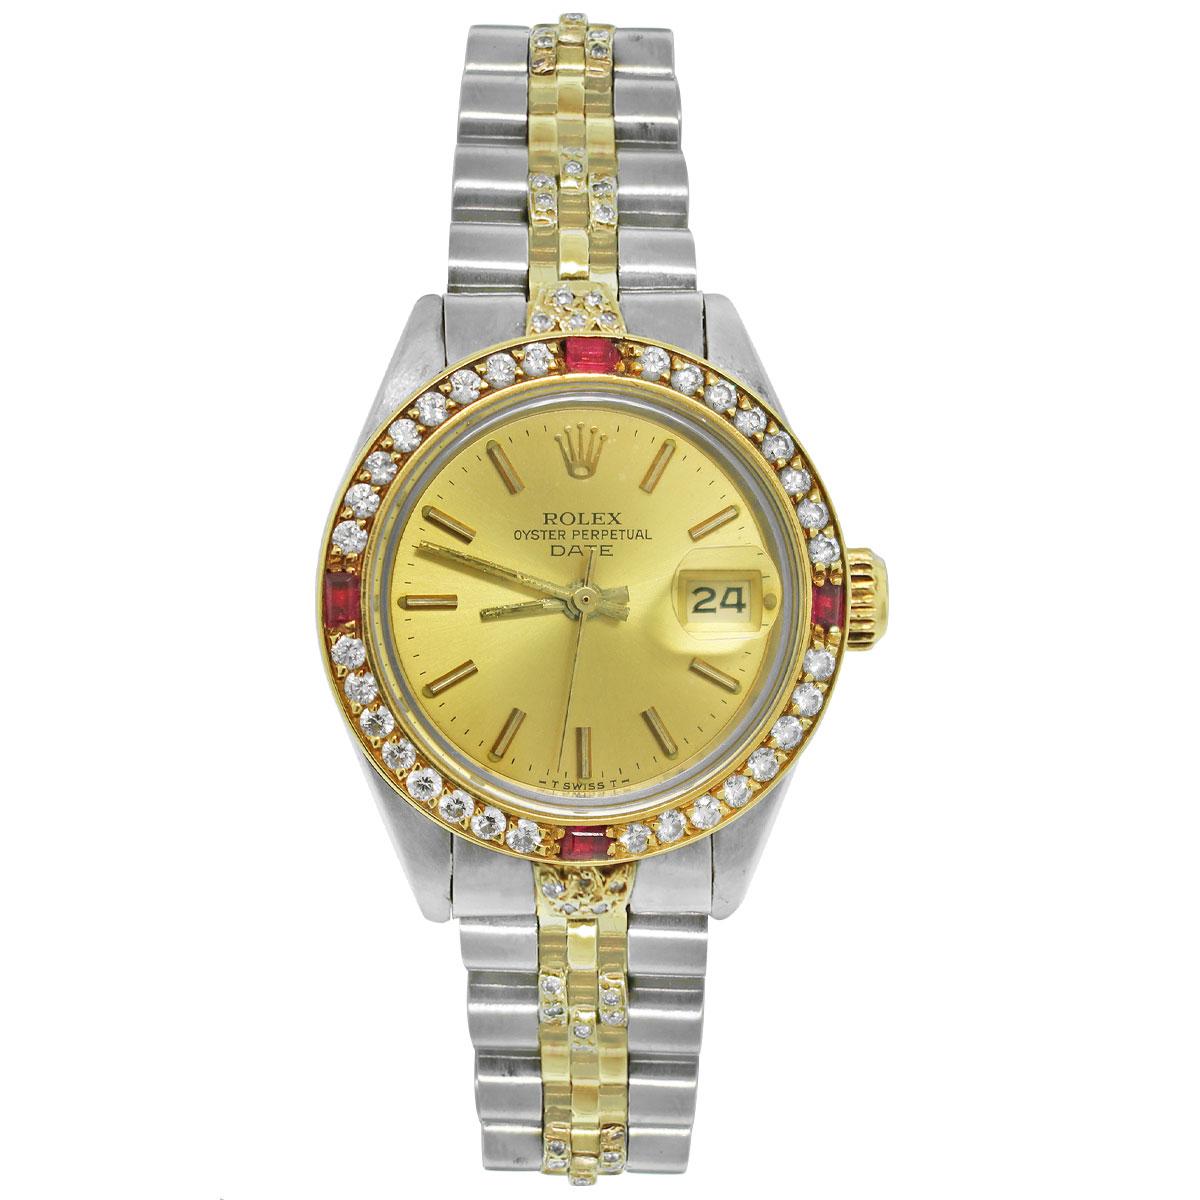 Brand: Rolex
MPN: 6917
Model: Date
Case Material: Stainless Steel
Crystal: Sapphire
Bezel: 18k Yellow Gold ruby and diamond bezel (aftermarket)
Dial: Champagne dial with gold stick hour markers and hands; Date at 3 o'clock. (factory)
Bracelet: Two